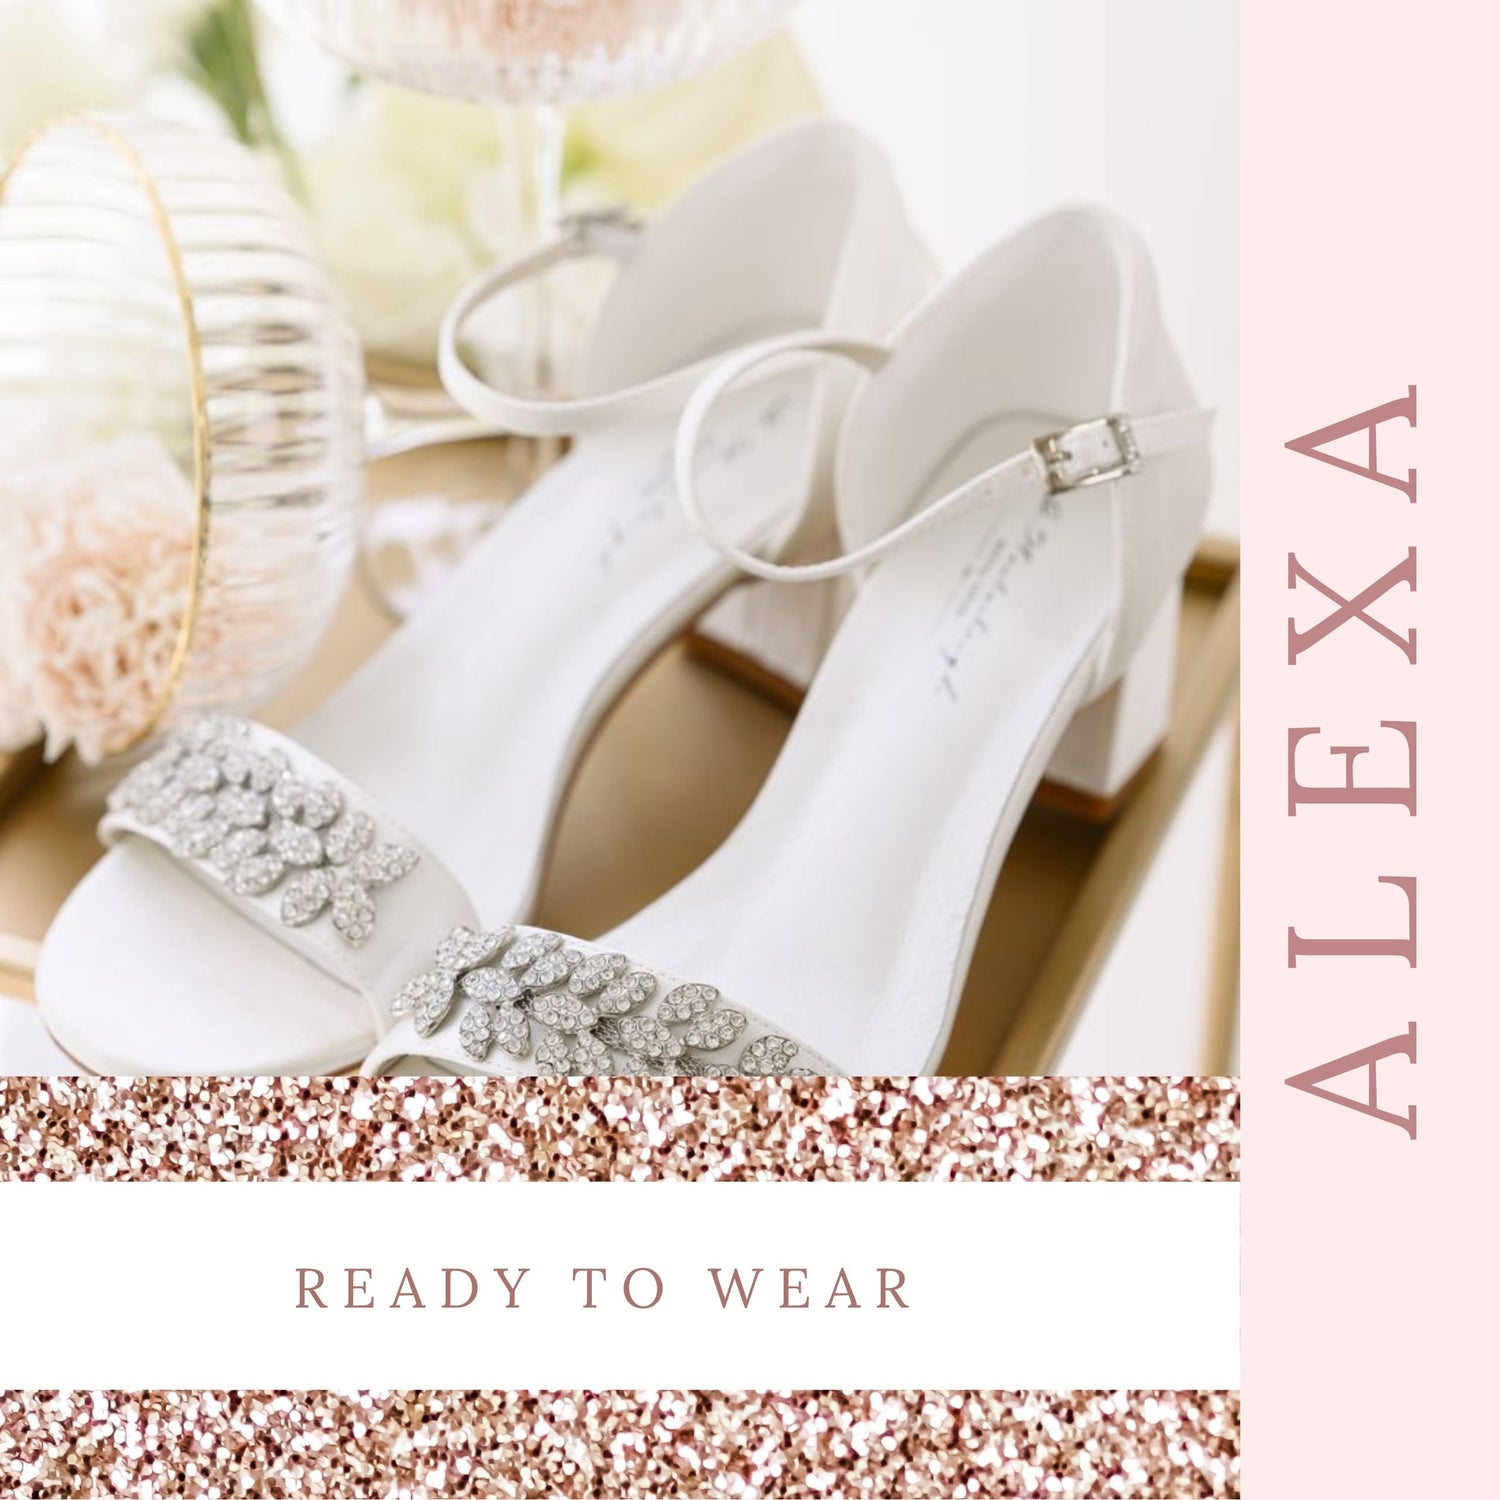 ivory-bridesmaids-shoes